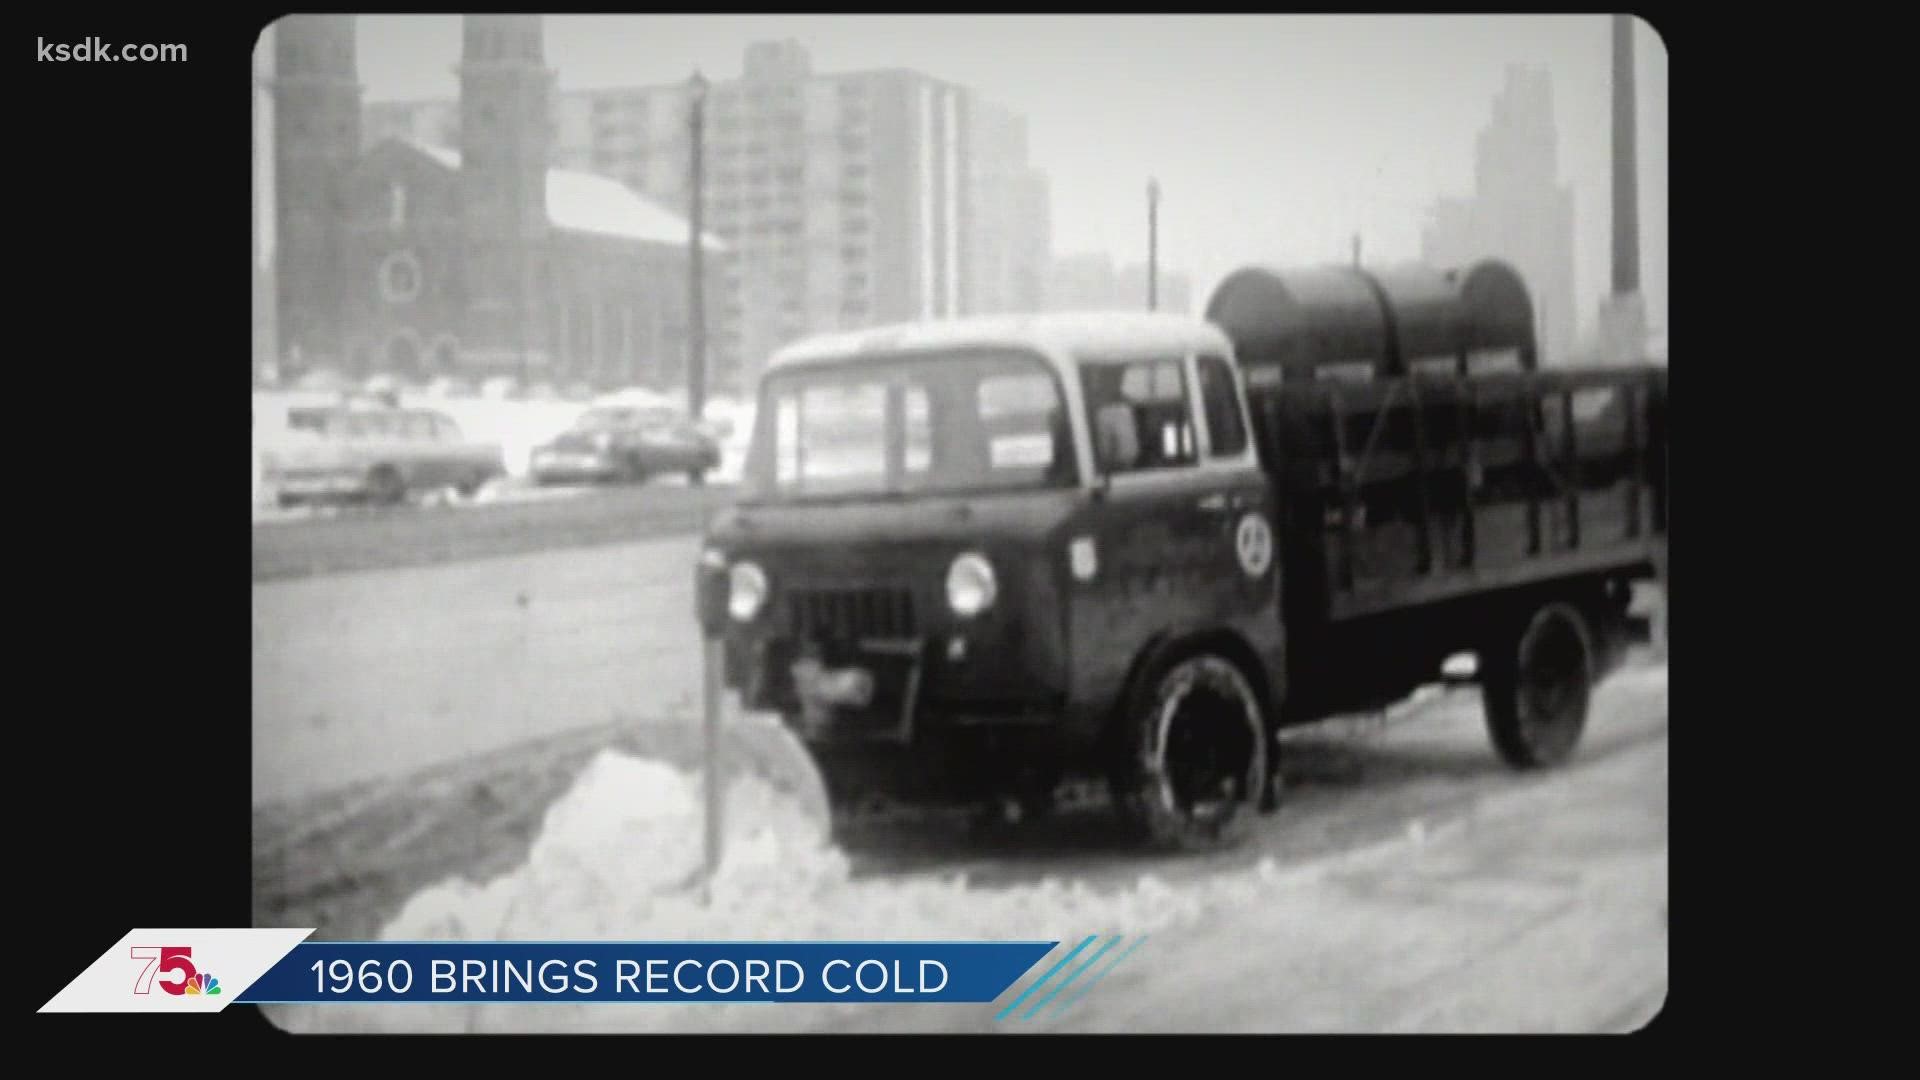 For the first three weeks of spring in 1960, St. Louis temperatures didn't climb much above the freezing mark. Jim Castillo gives us a look back in time.